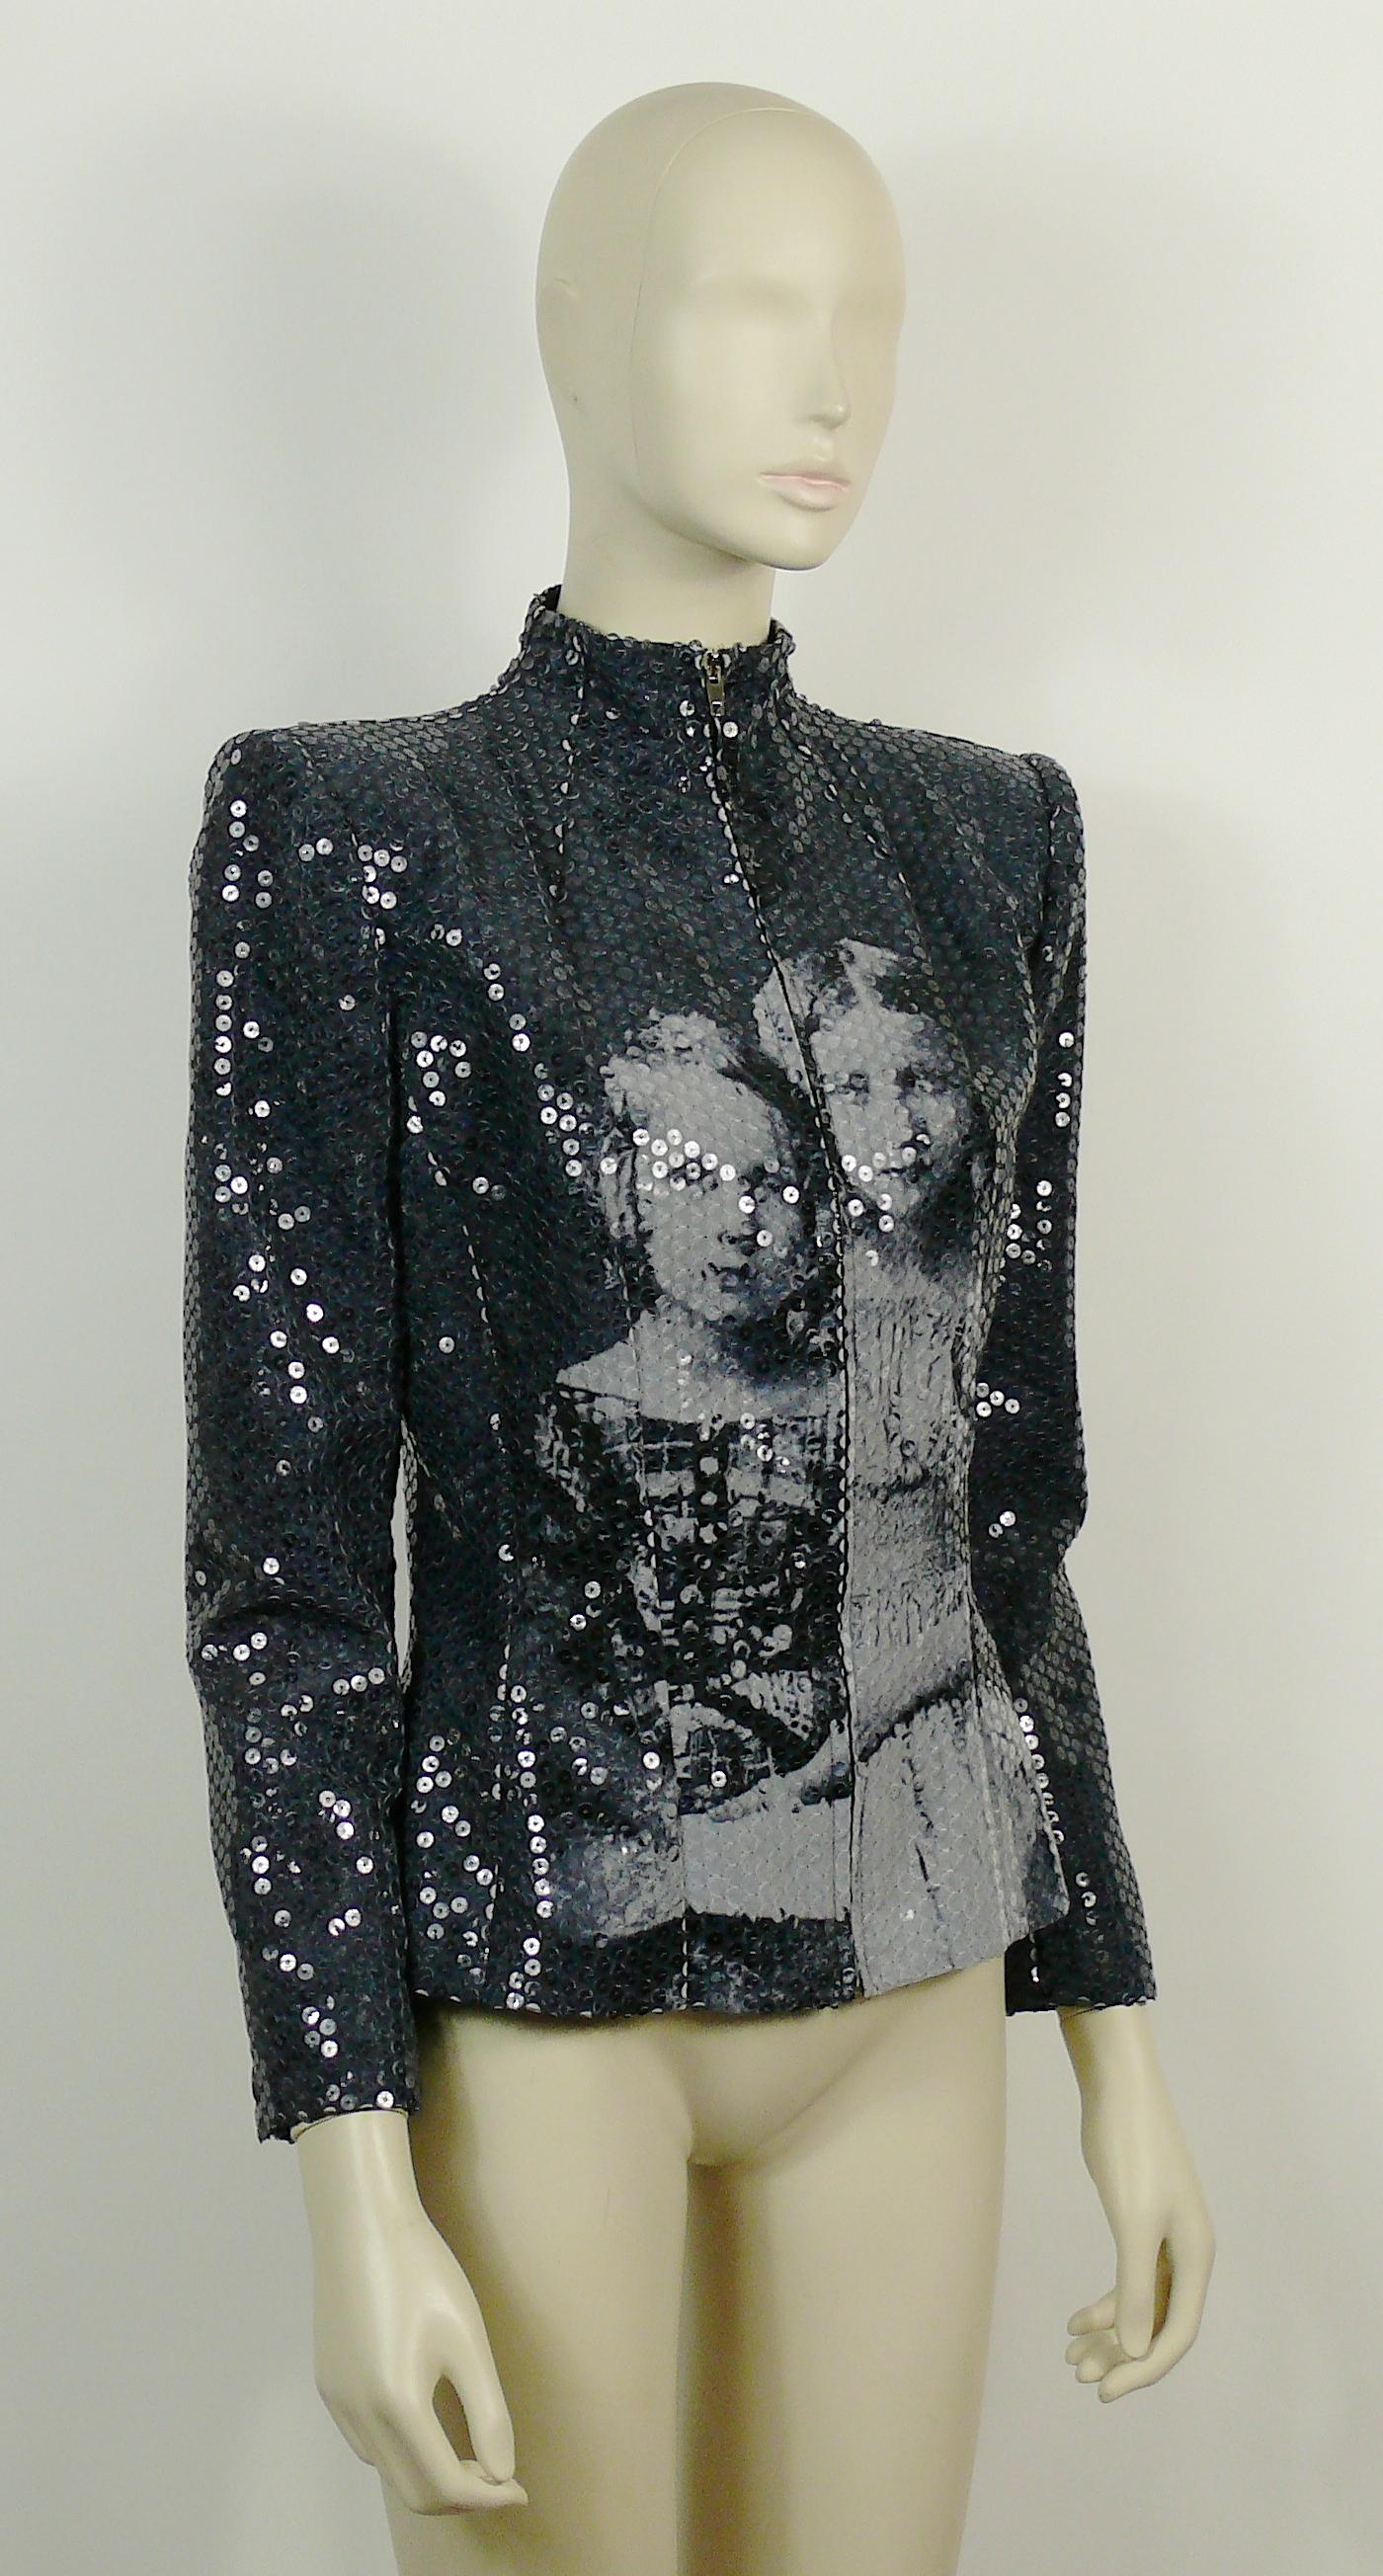 ALEXANDER McQUEEN important Museum quality Russian Imperial ROMANOV Princess sequin jacket.

Fall/Winter 1998 